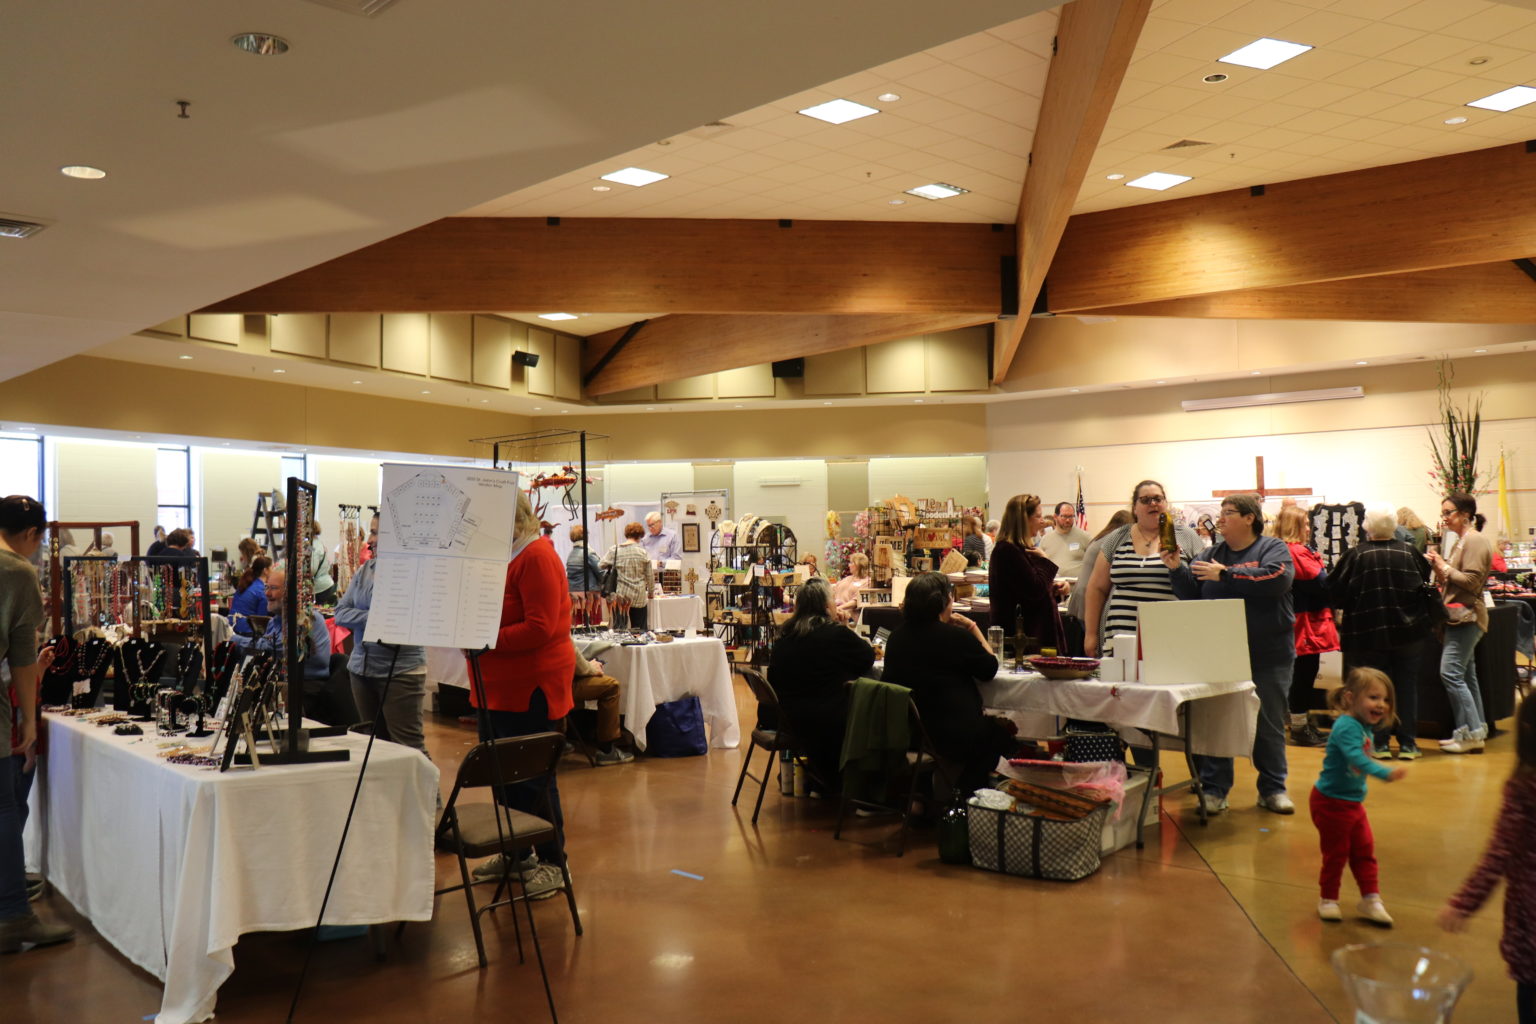 Annual St. John’s Craft Fair to be held in Nov. this year, booth